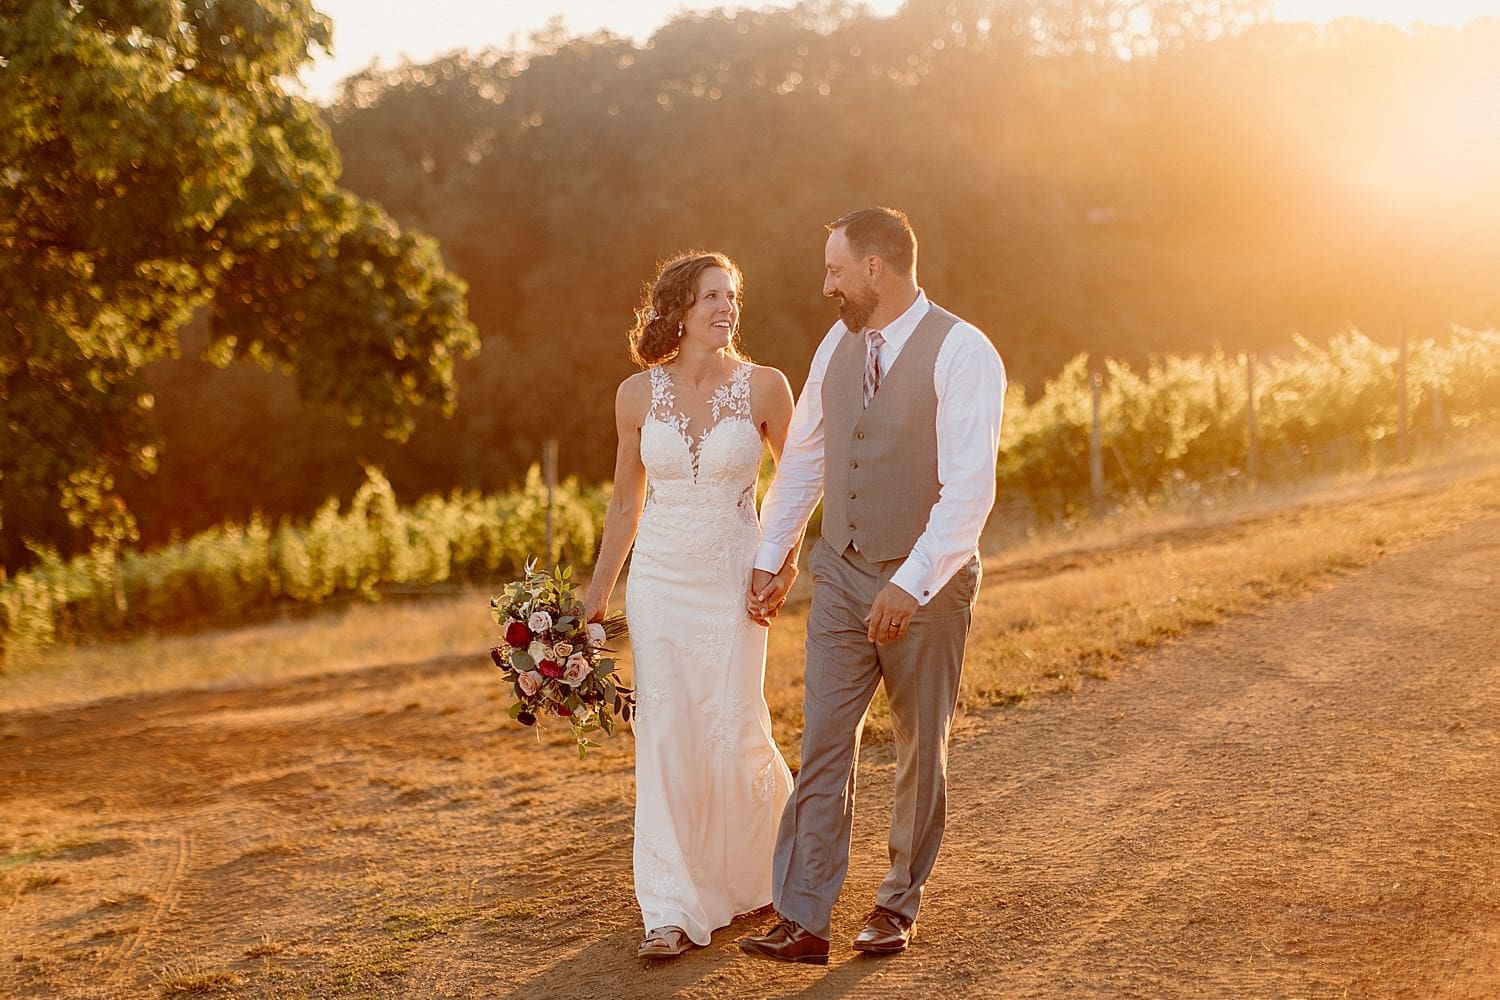 A bride and groom taking sunset portraits at their Maysara winery wedding.